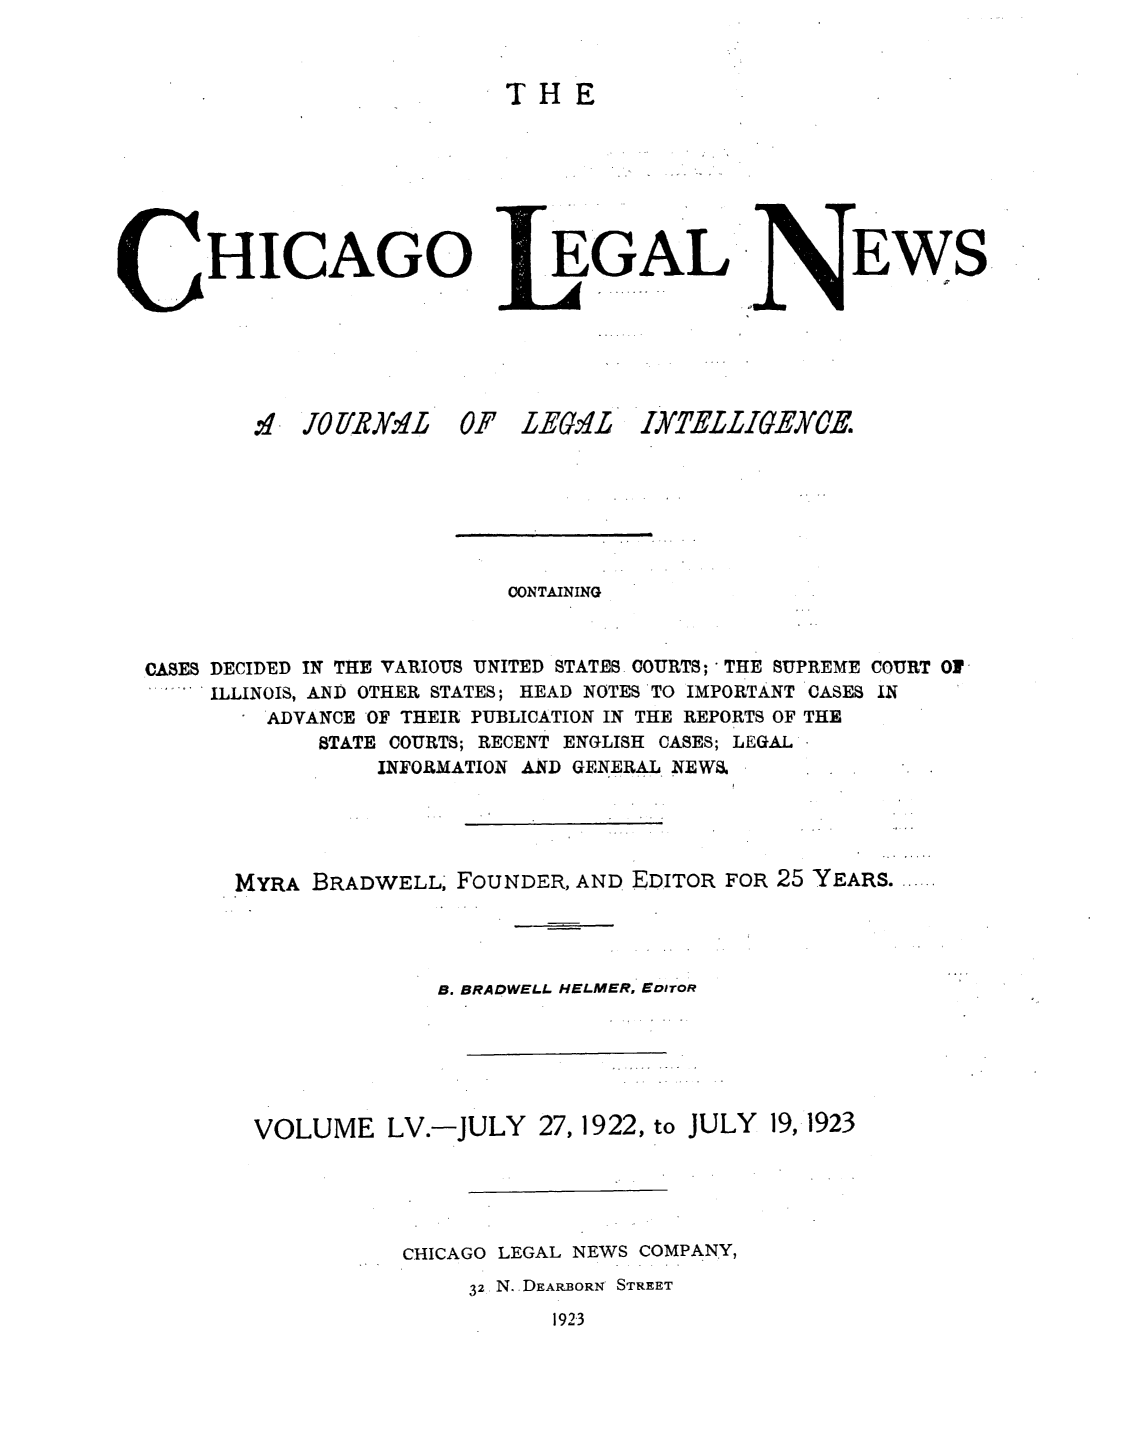 handle is hein.journals/chiclene55 and id is 1 raw text is: THEHICAGO,.~ JO Y 2Y. ,lt 0EGALF LEaA'LEWSCONTAININGCASES DECIDED IN THE VARIOUS UNITED STATES COURTS; THE SUPREME COURT 01ILLINOIS, AND OTHER STATES; HEAD NOTES TO IMPORTANT CASES INADVANCE OF THEIR PUBLICATION IN THE REPORTS OF THESTATE COURTS; RECENT ENGLISH CASES; LEGALINFORMATION AND GENERAL NEWS.MYRA BRADWELL, FOUNDER, AND EDITOR FOR 25 YEARS .......B. BRADWELI. HELMER, EDITORVOLUME LV.-JULY27, 1922, to JULY 19,1923CHICAGO LEGAL NEWS COMPANY,32 N. DEARBORN' STREET1923IXTELLIGE.